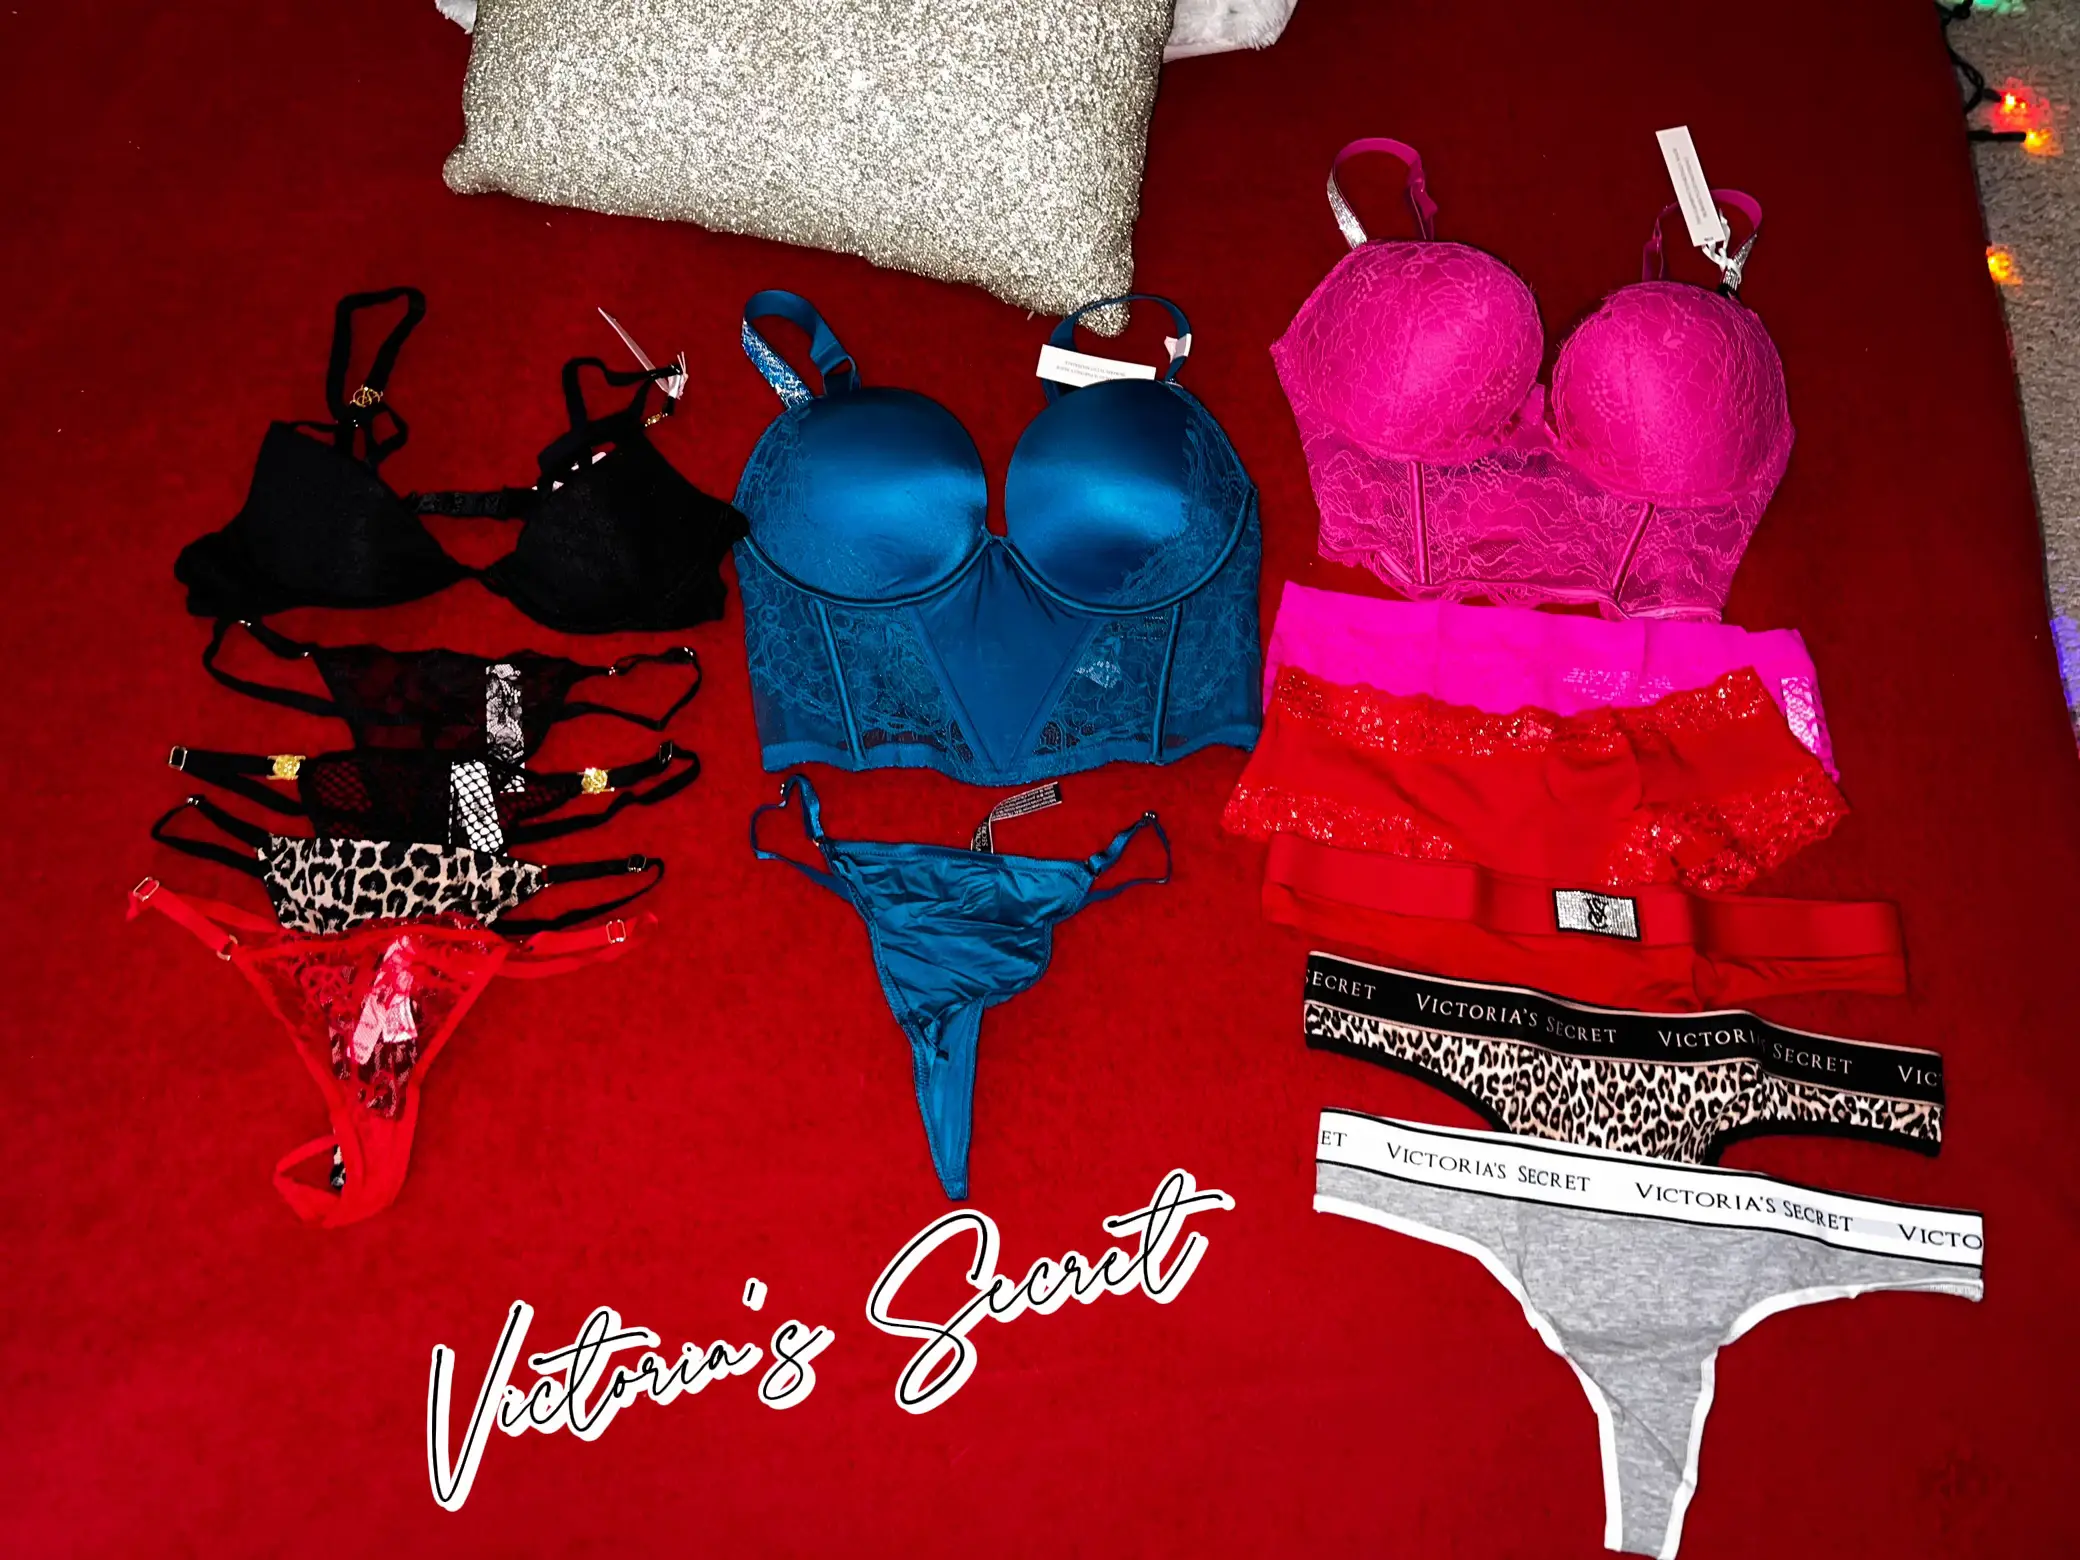 Victoria's Secret Push Up Red Bra Size 32DD - $12 - From Hailey